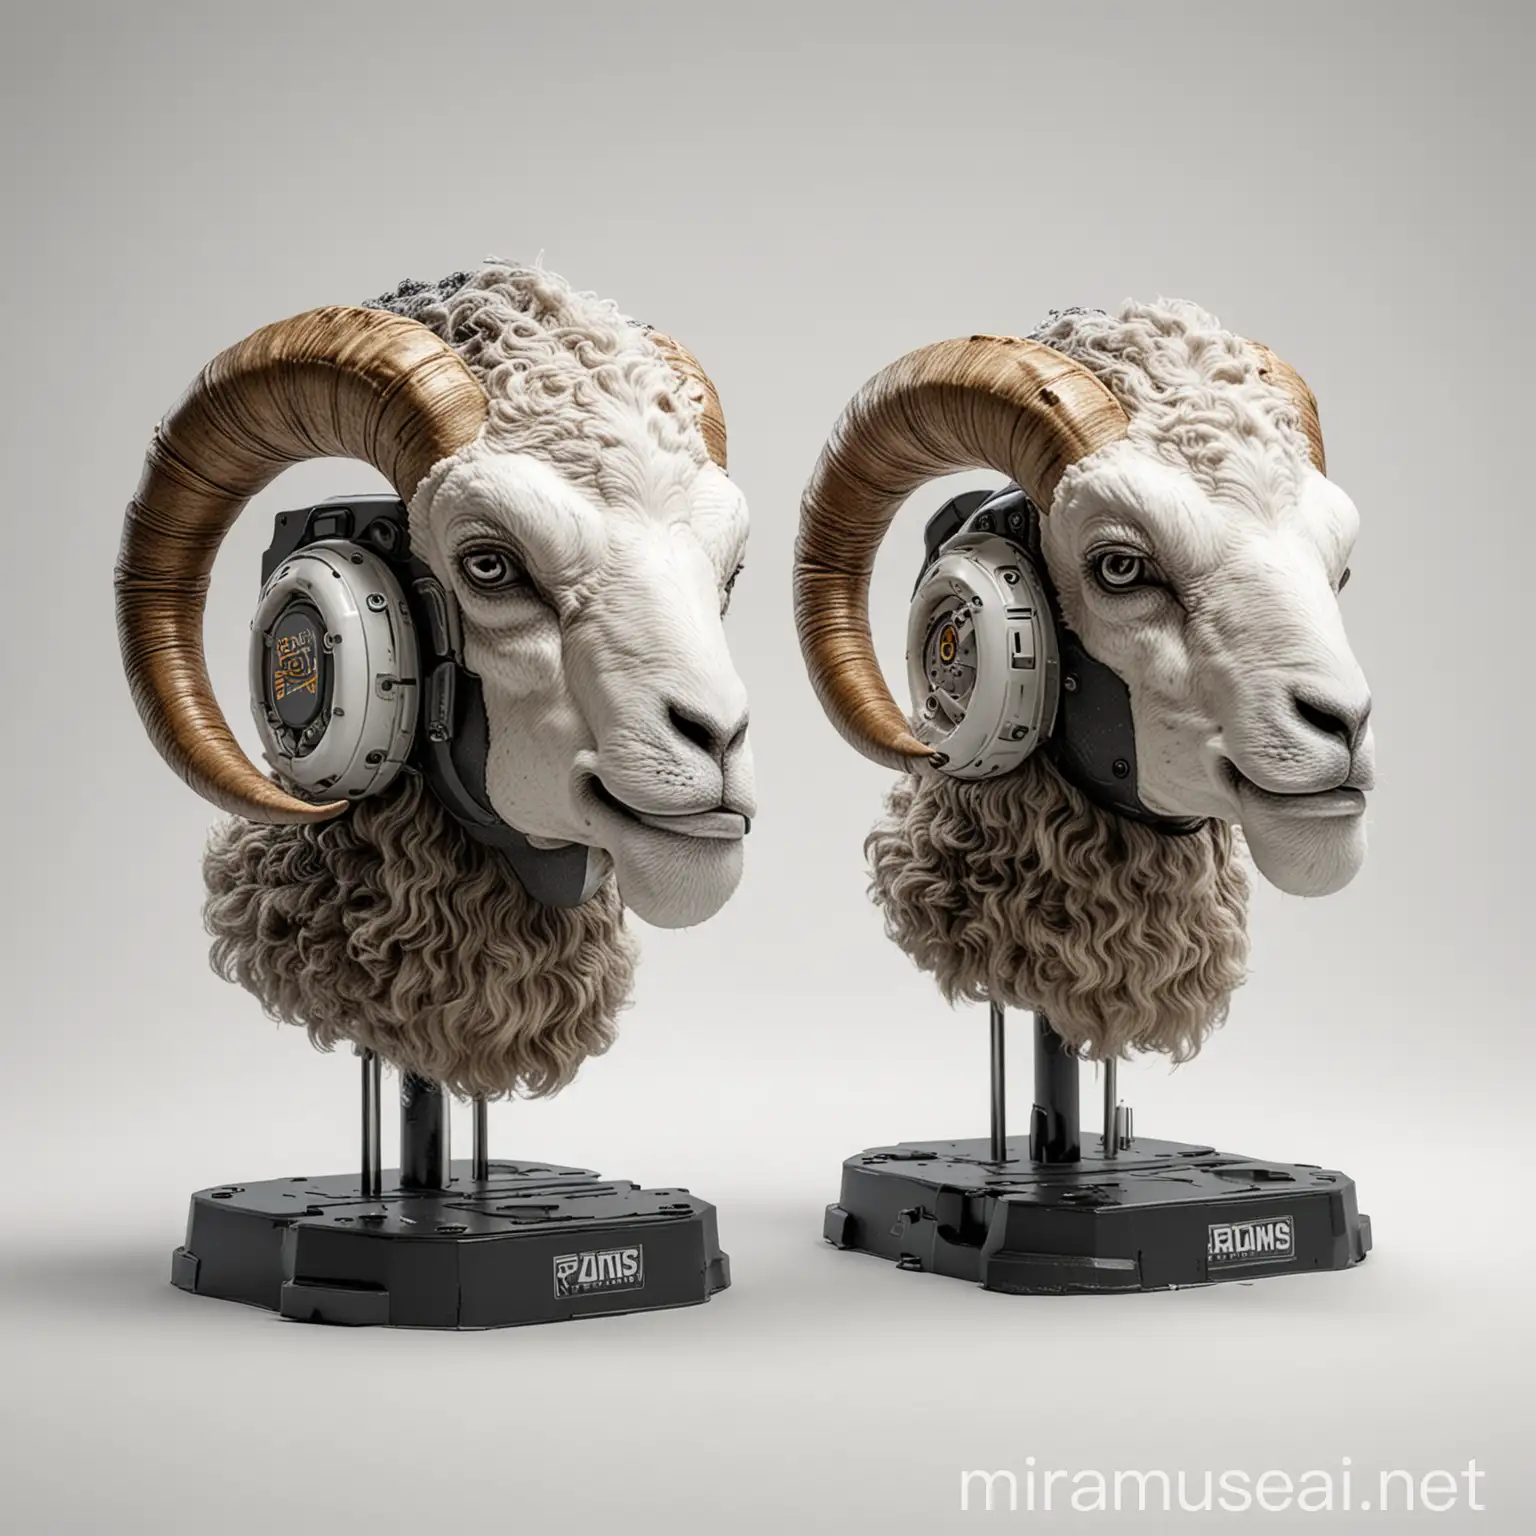 Create three rams charging with only ram helmets and a white background